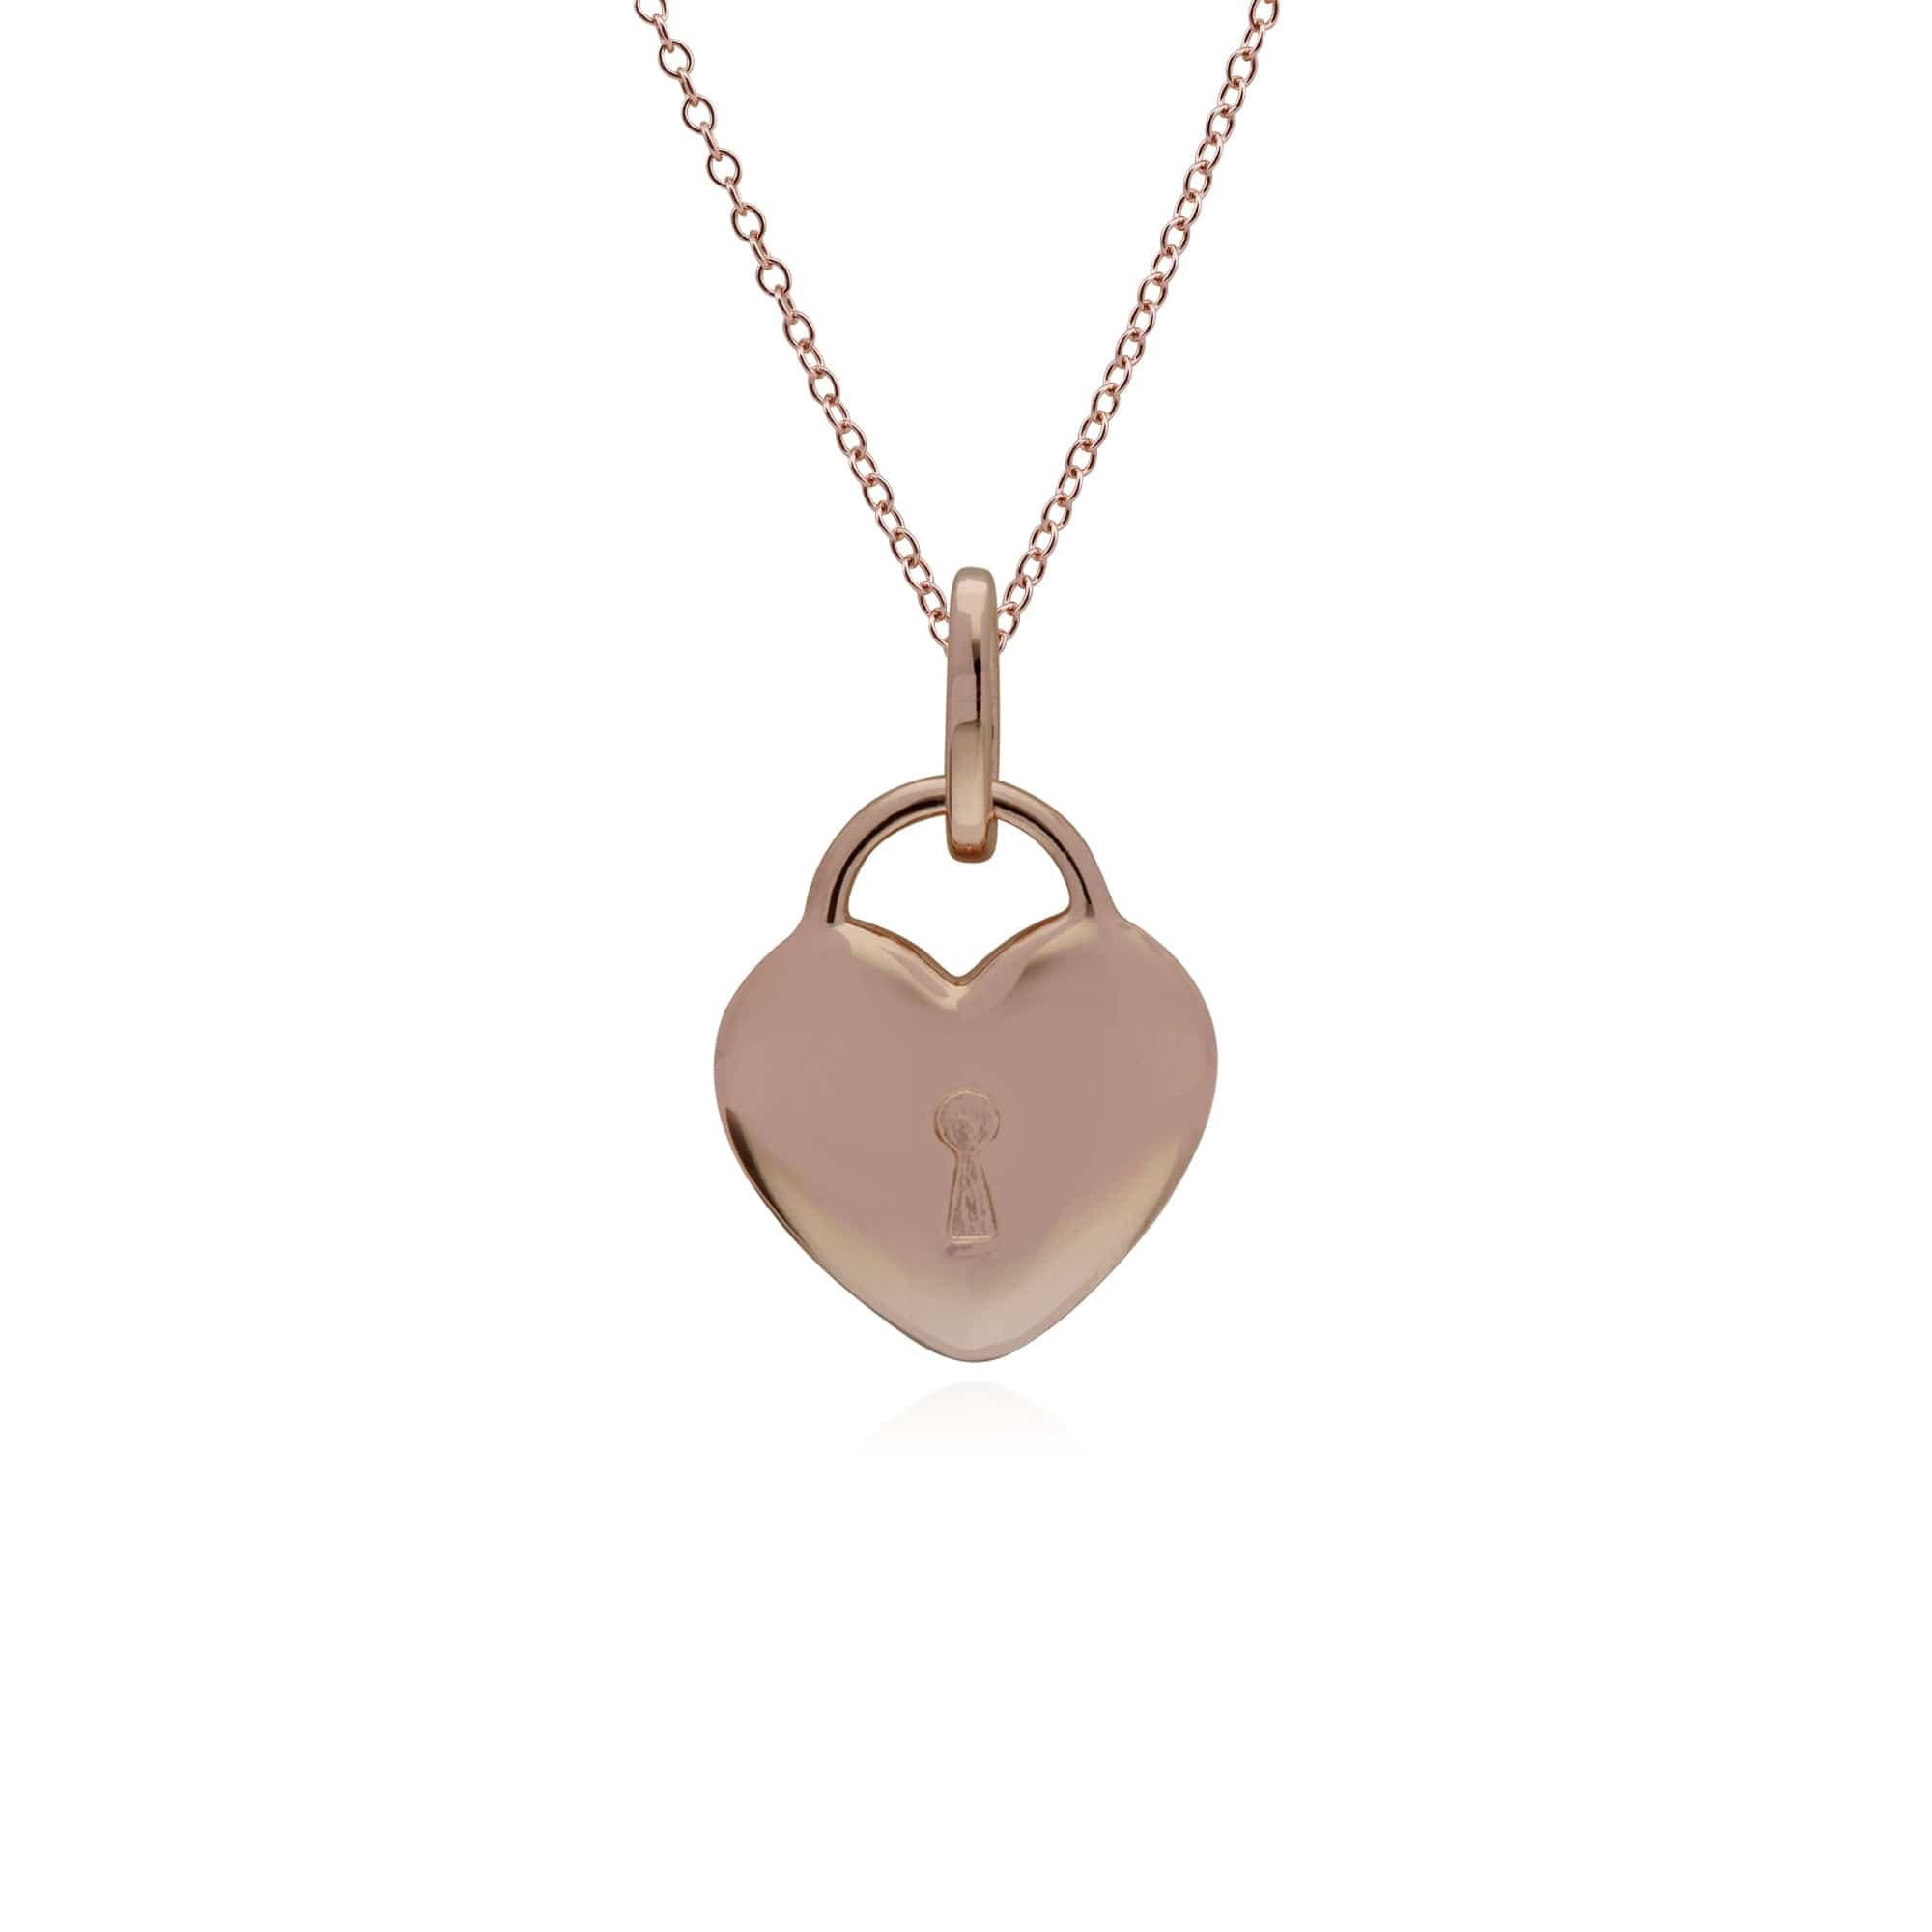 270P025701925-270P026901925 Classic Plain Heart Lock Pendant & Pearl Charm in Rose Gold Plated 925 Sterling Silver 3